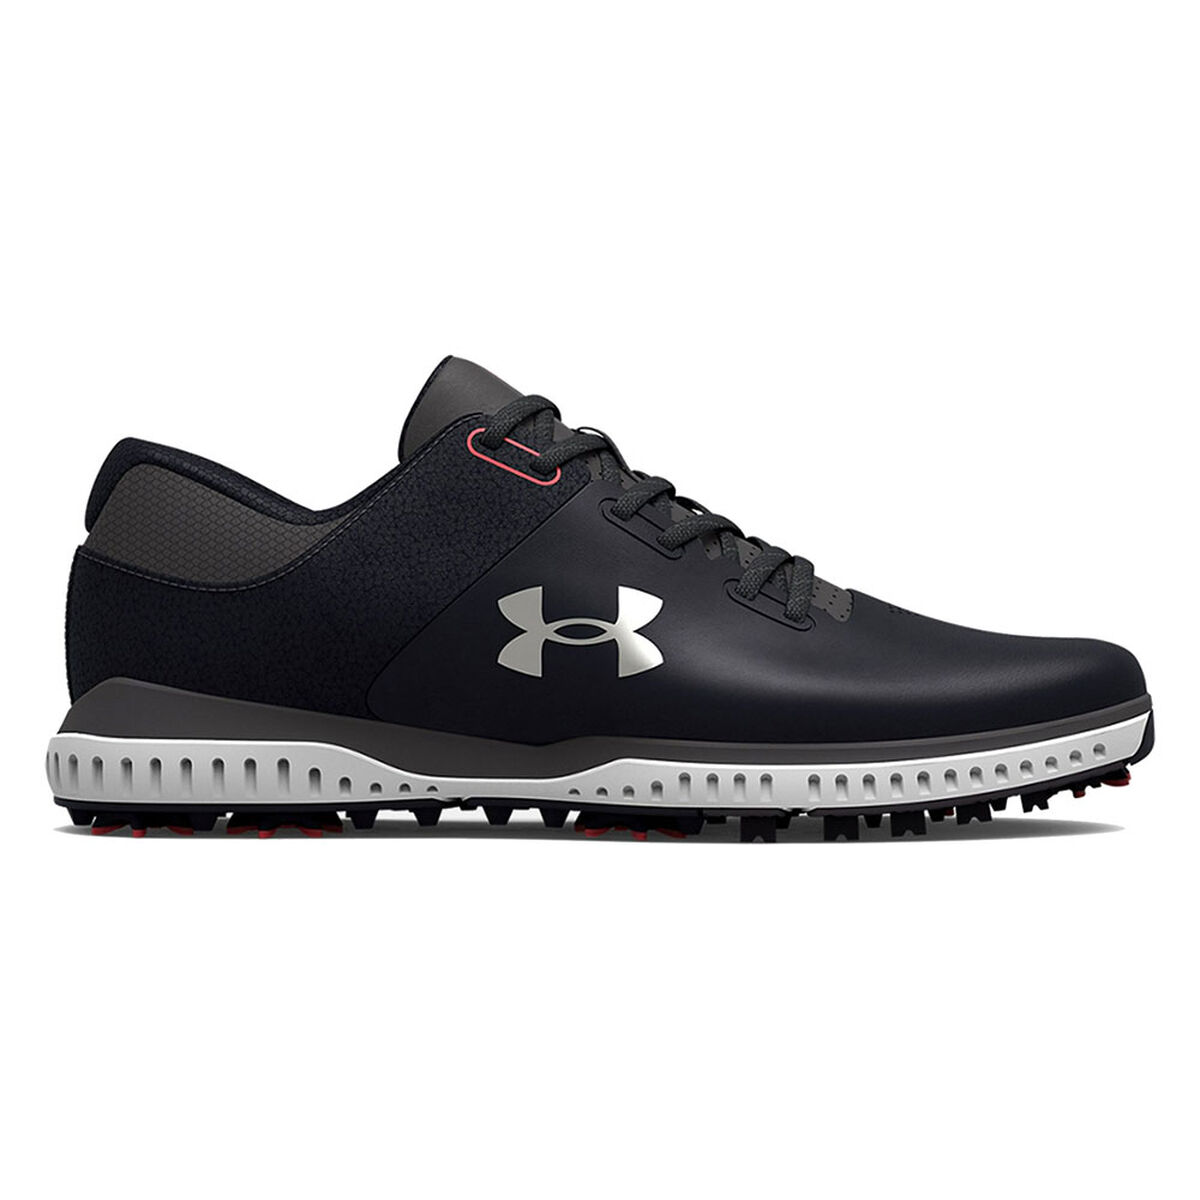 Under Armour Black Comfortable Medal RST Waterproof Spiked Golf Shoes, Size: 9 | American Golf